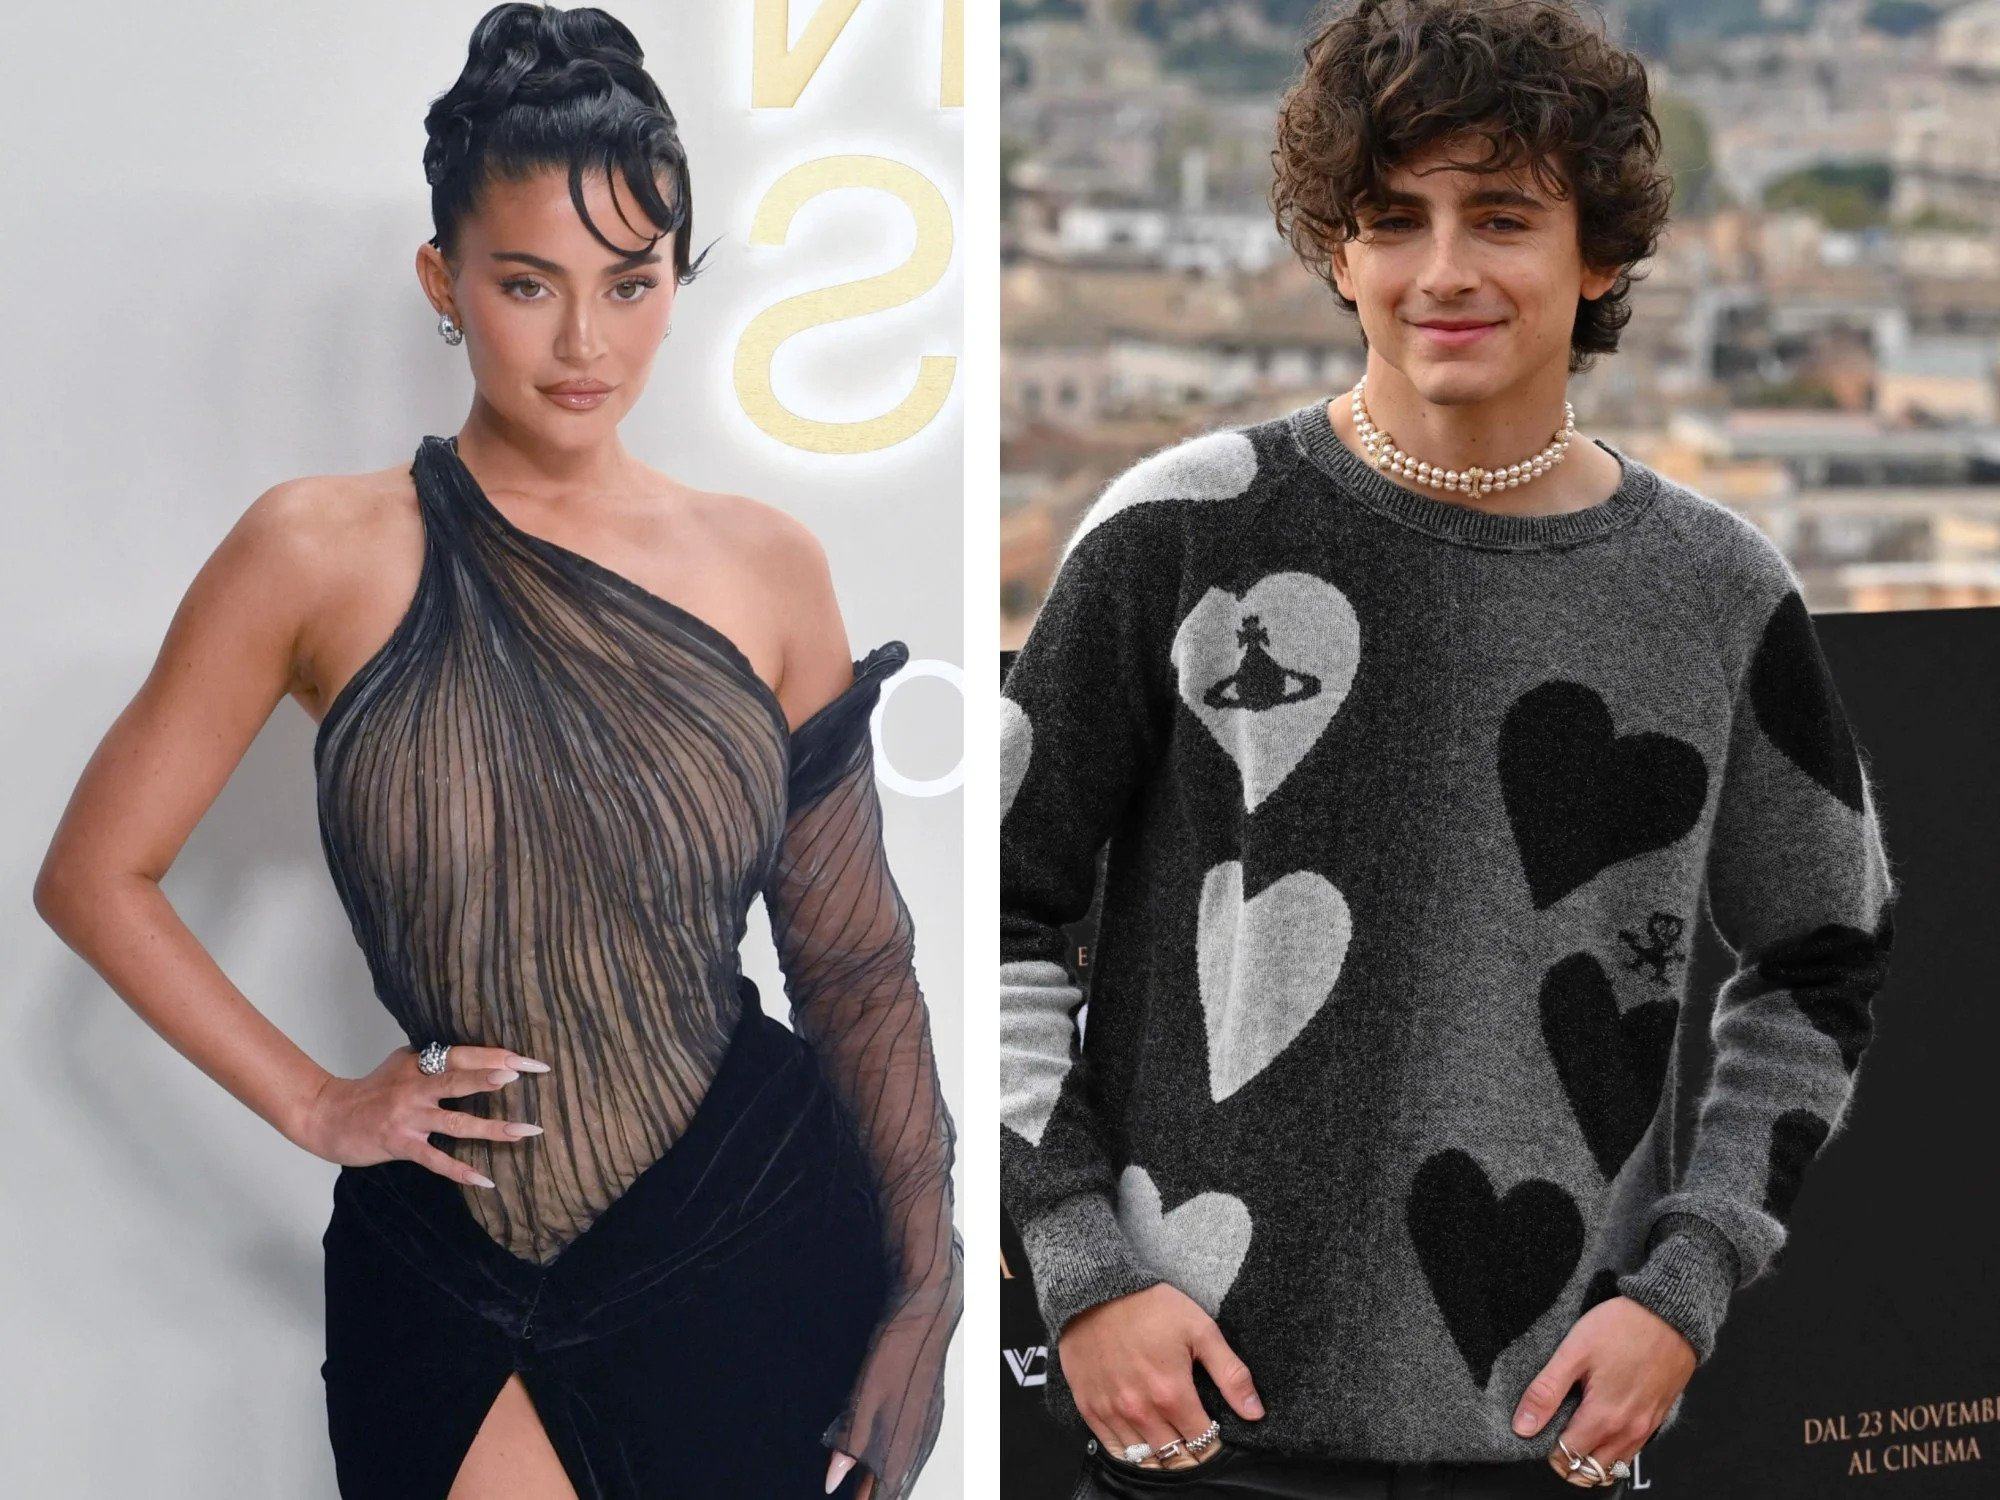 Are Kylie Jenner and Timothée Chalamet really dating? Inside their